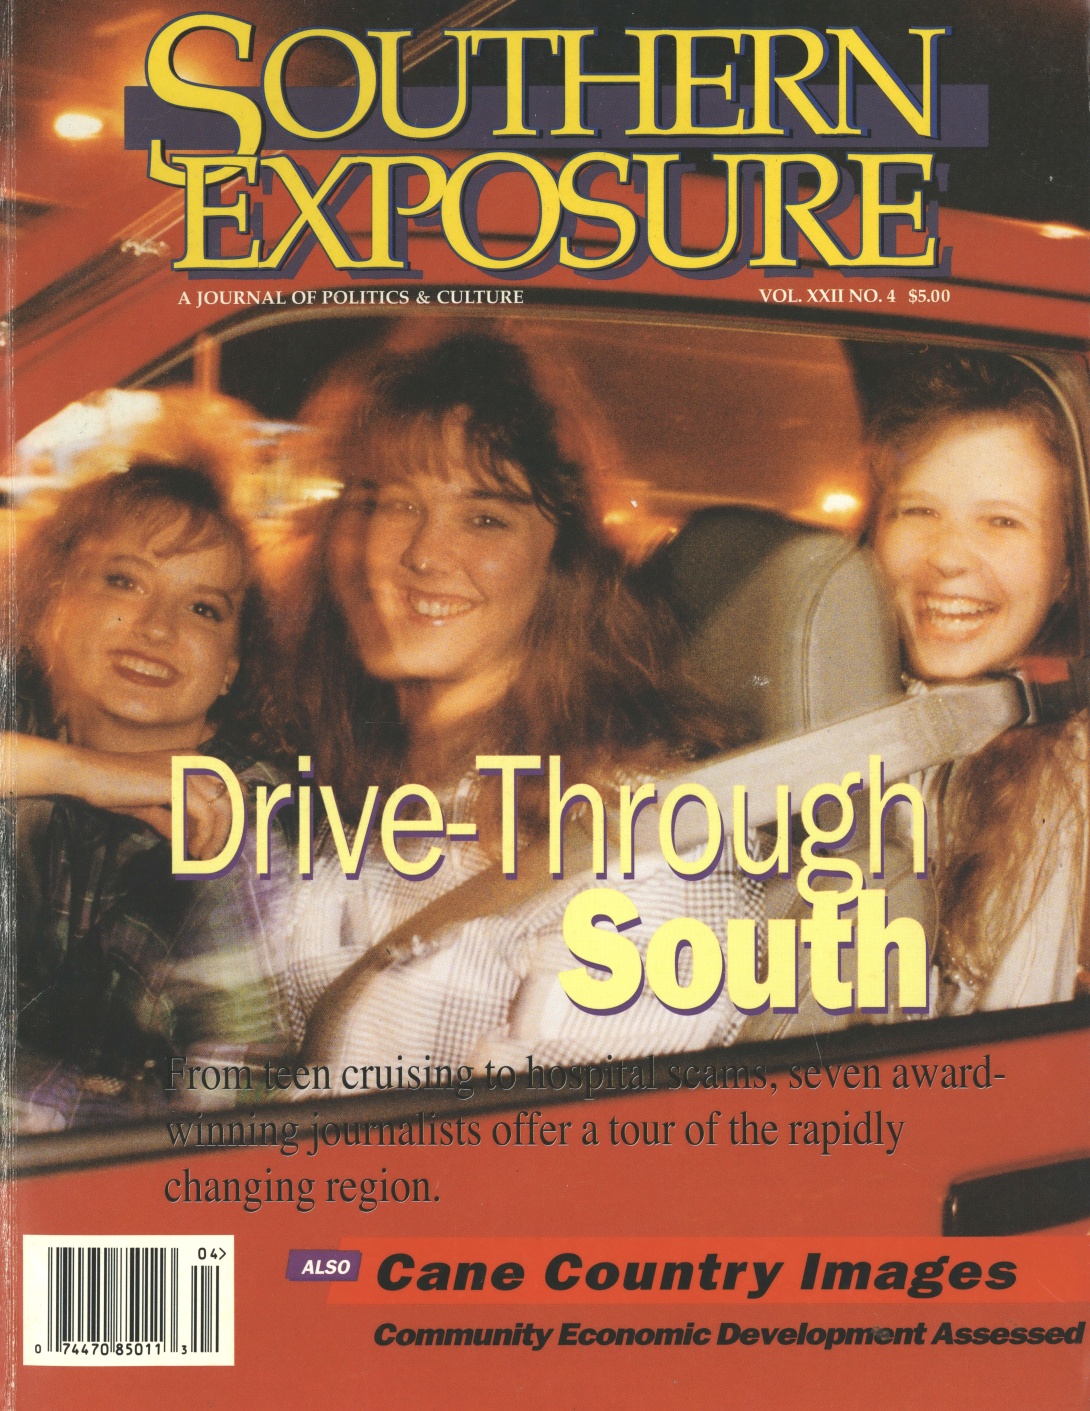 Magazine cover with a group of girls laughing and smiling in a car, reads "Drive-Through South: From teen cruising to hospital scams, seven award-winning journalists offer a tour of the rapidly changing region"